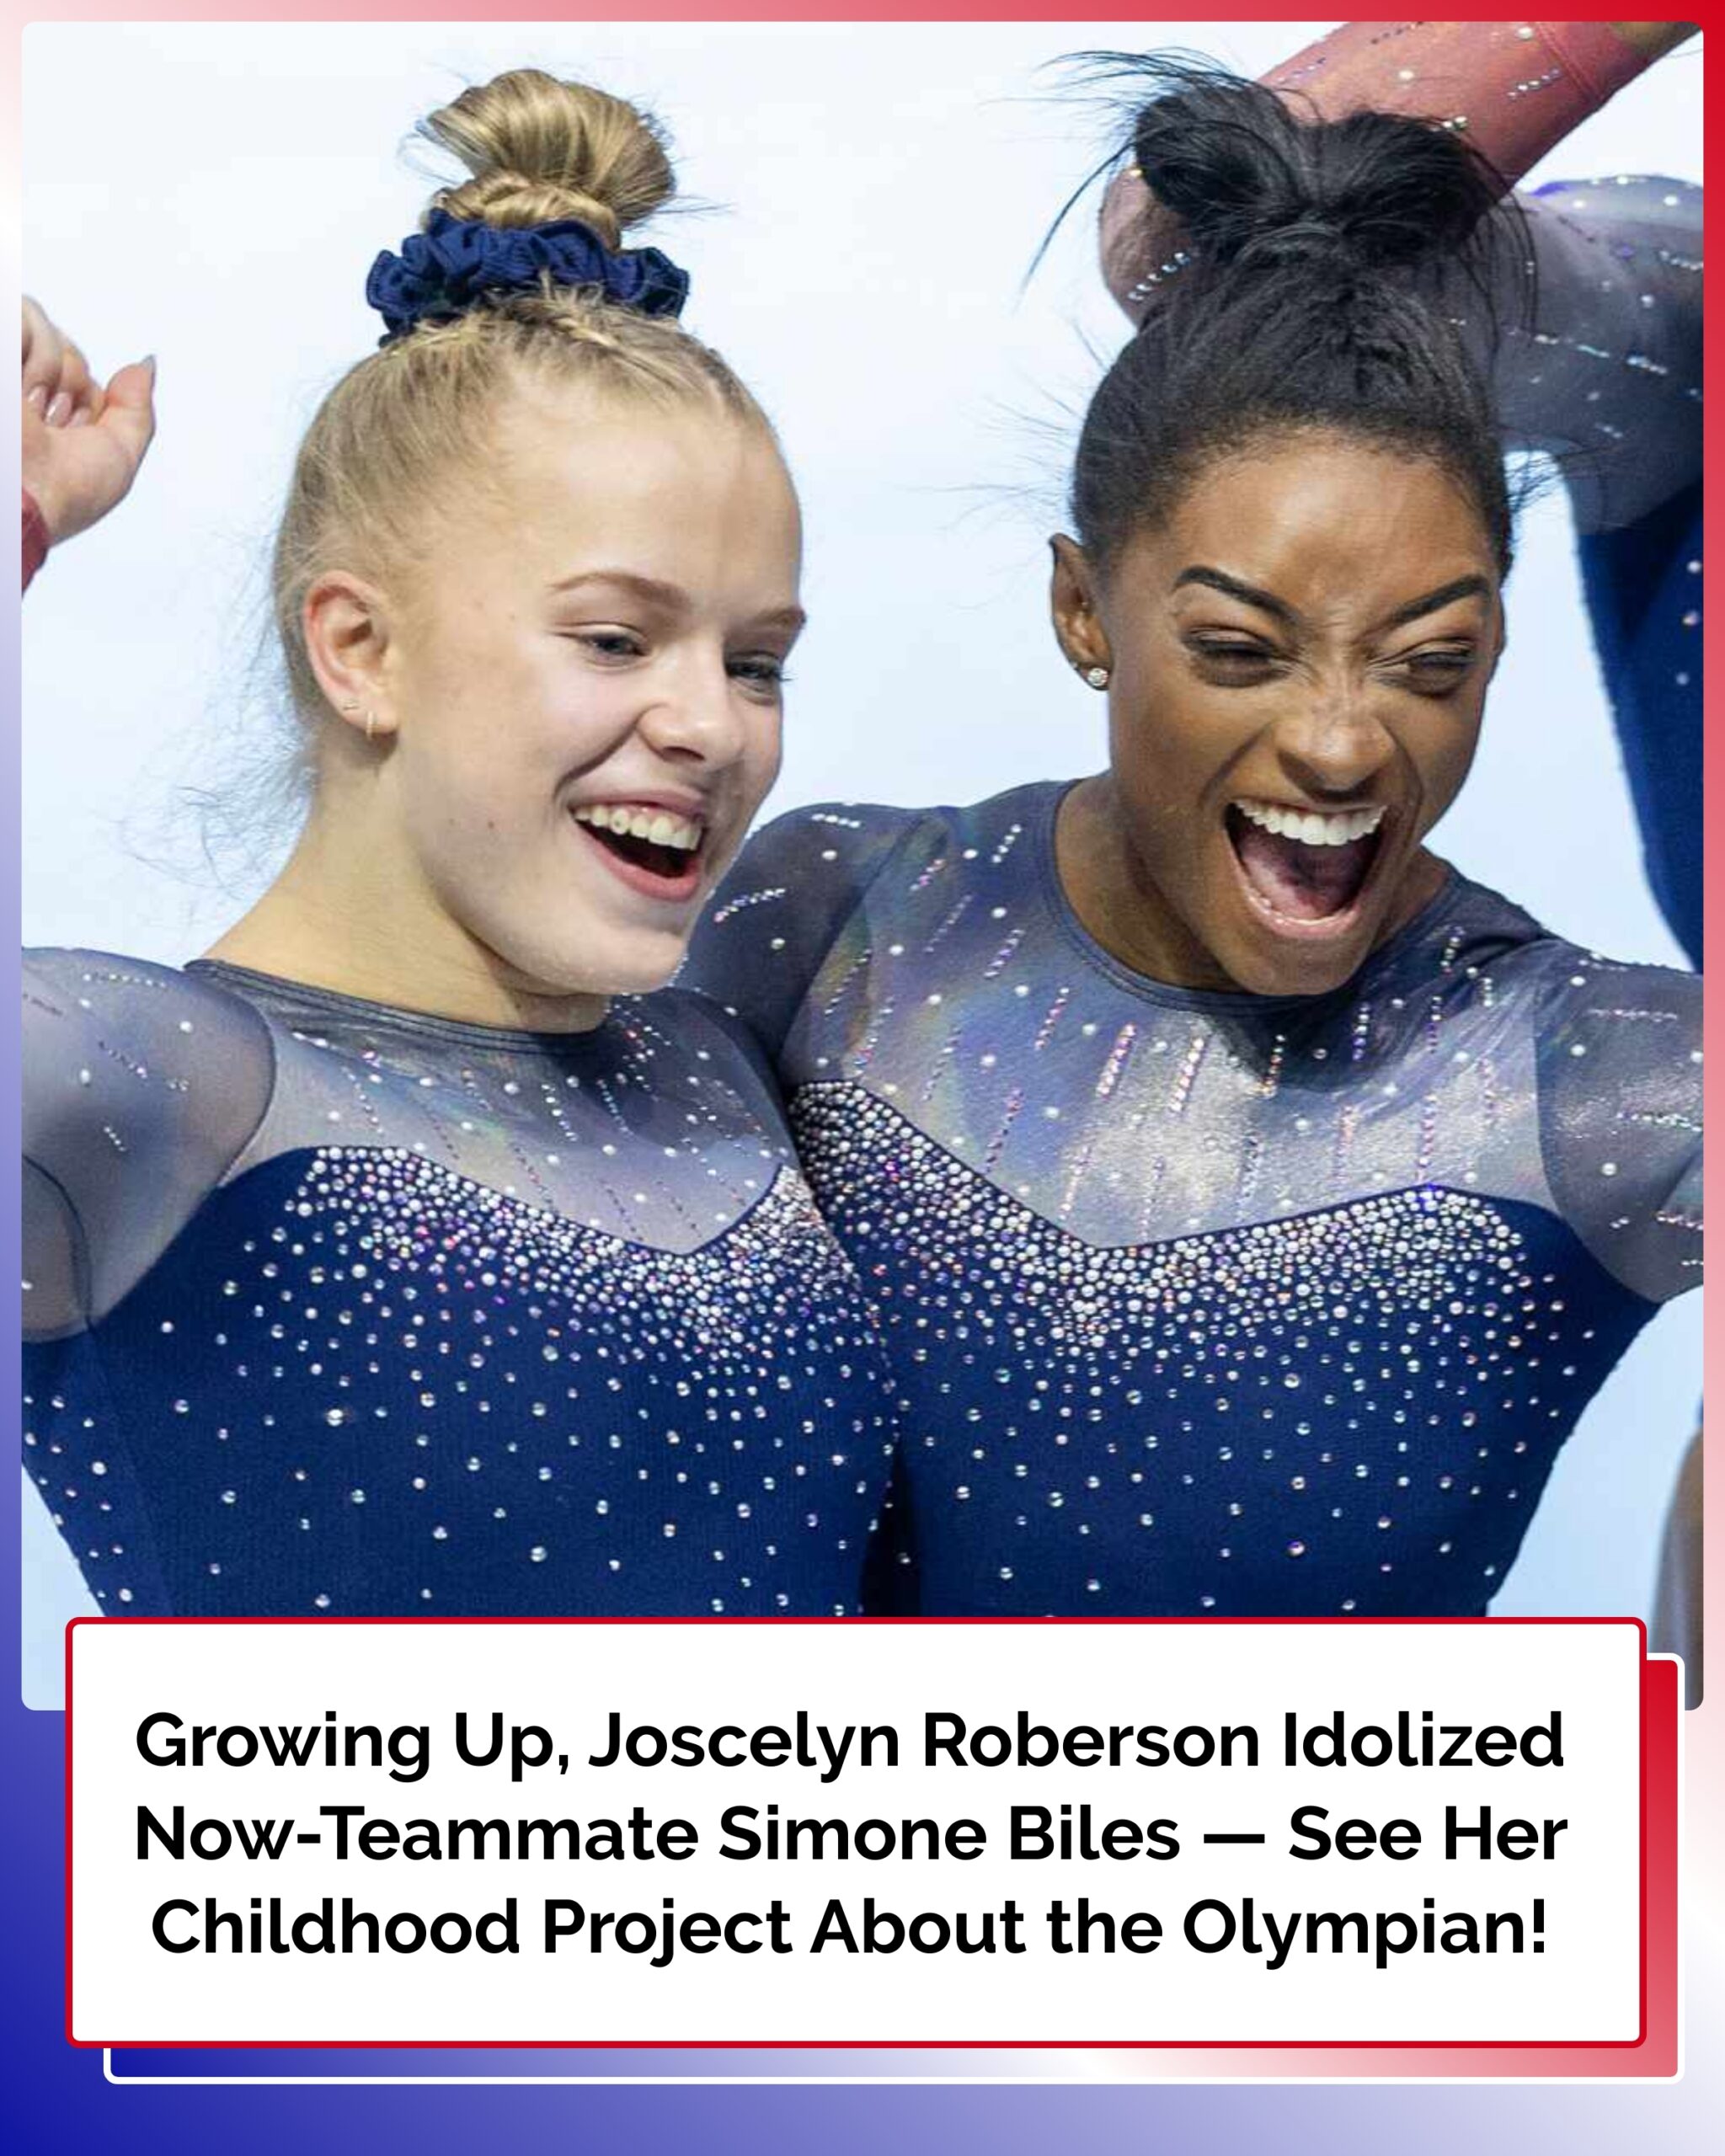 Gymnast Joscelyn Roberson Idolized Now-Teammate Simone Biles Growing Up — See Her Childhood Presentation About the Olympian